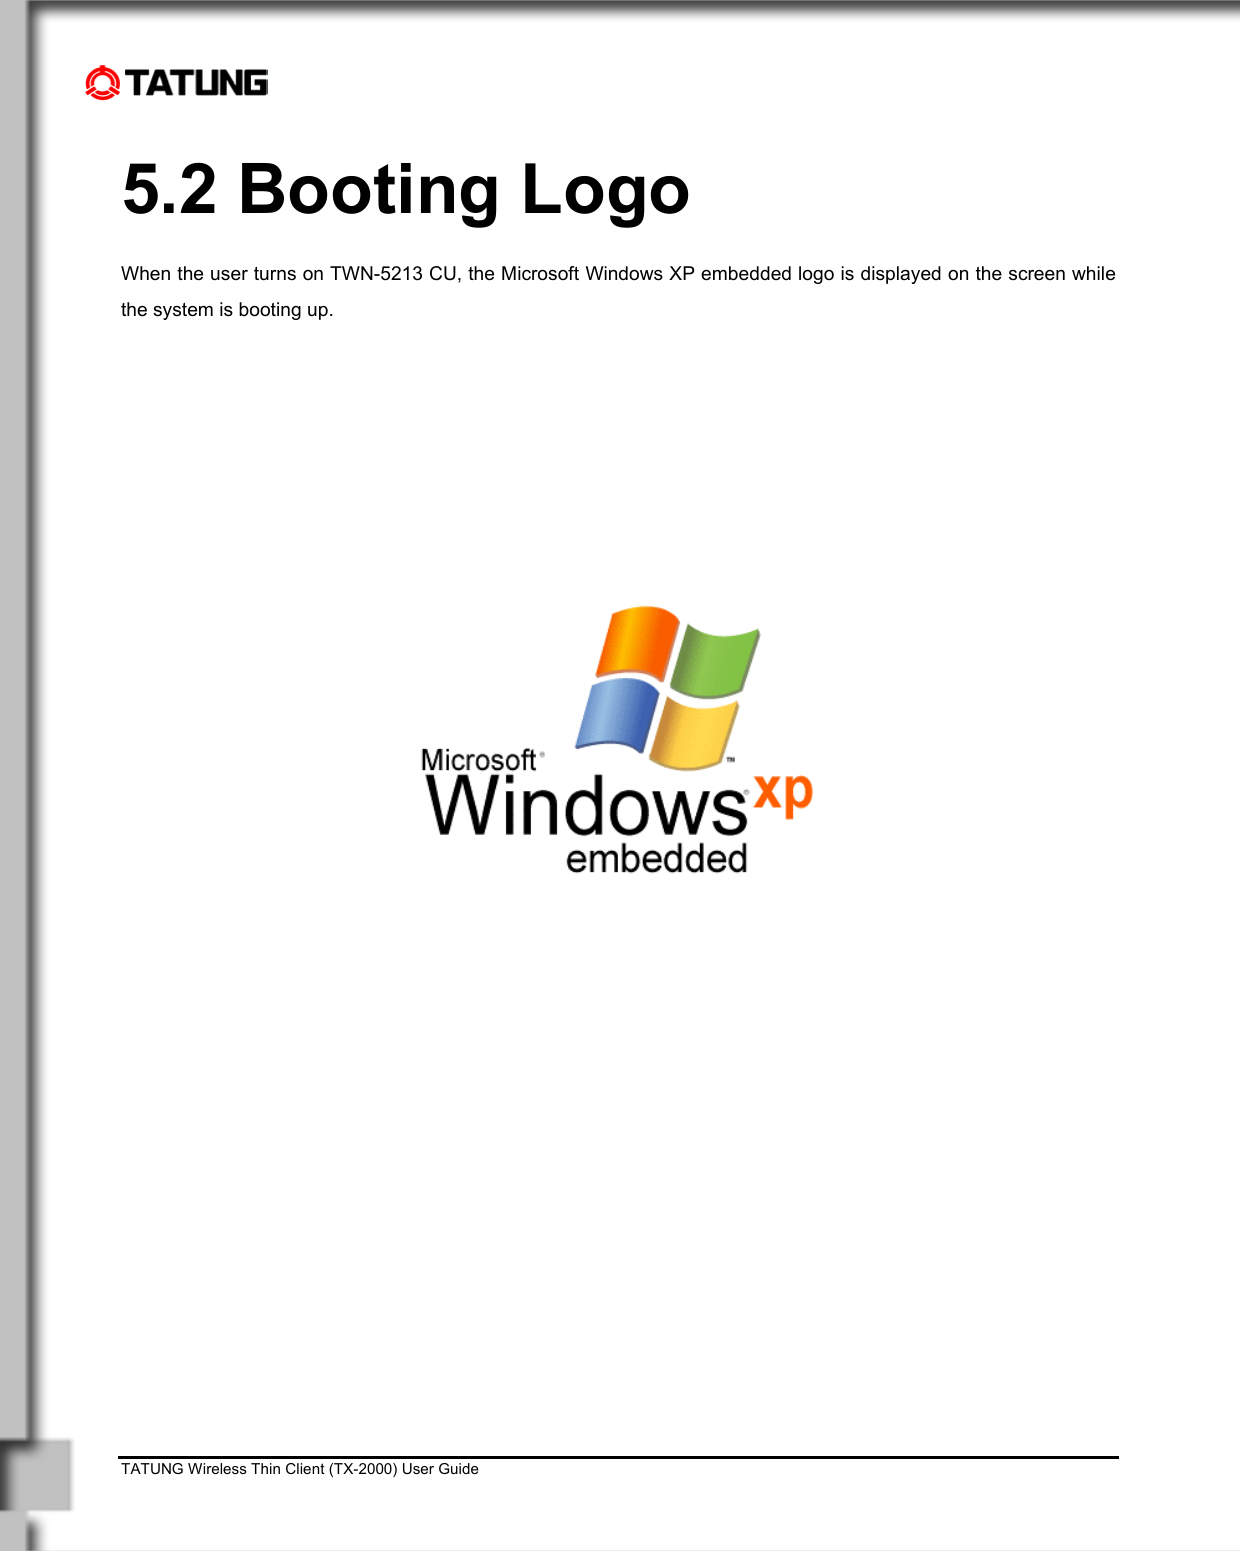    TATUNG Wireless Thin Client (TX-2000) User Guide                                                                                                                              5.2 Booting Logo When the user turns on TWN-5213 CU, the Microsoft Windows XP embedded logo is displayed on the screen while the system is booting up.              